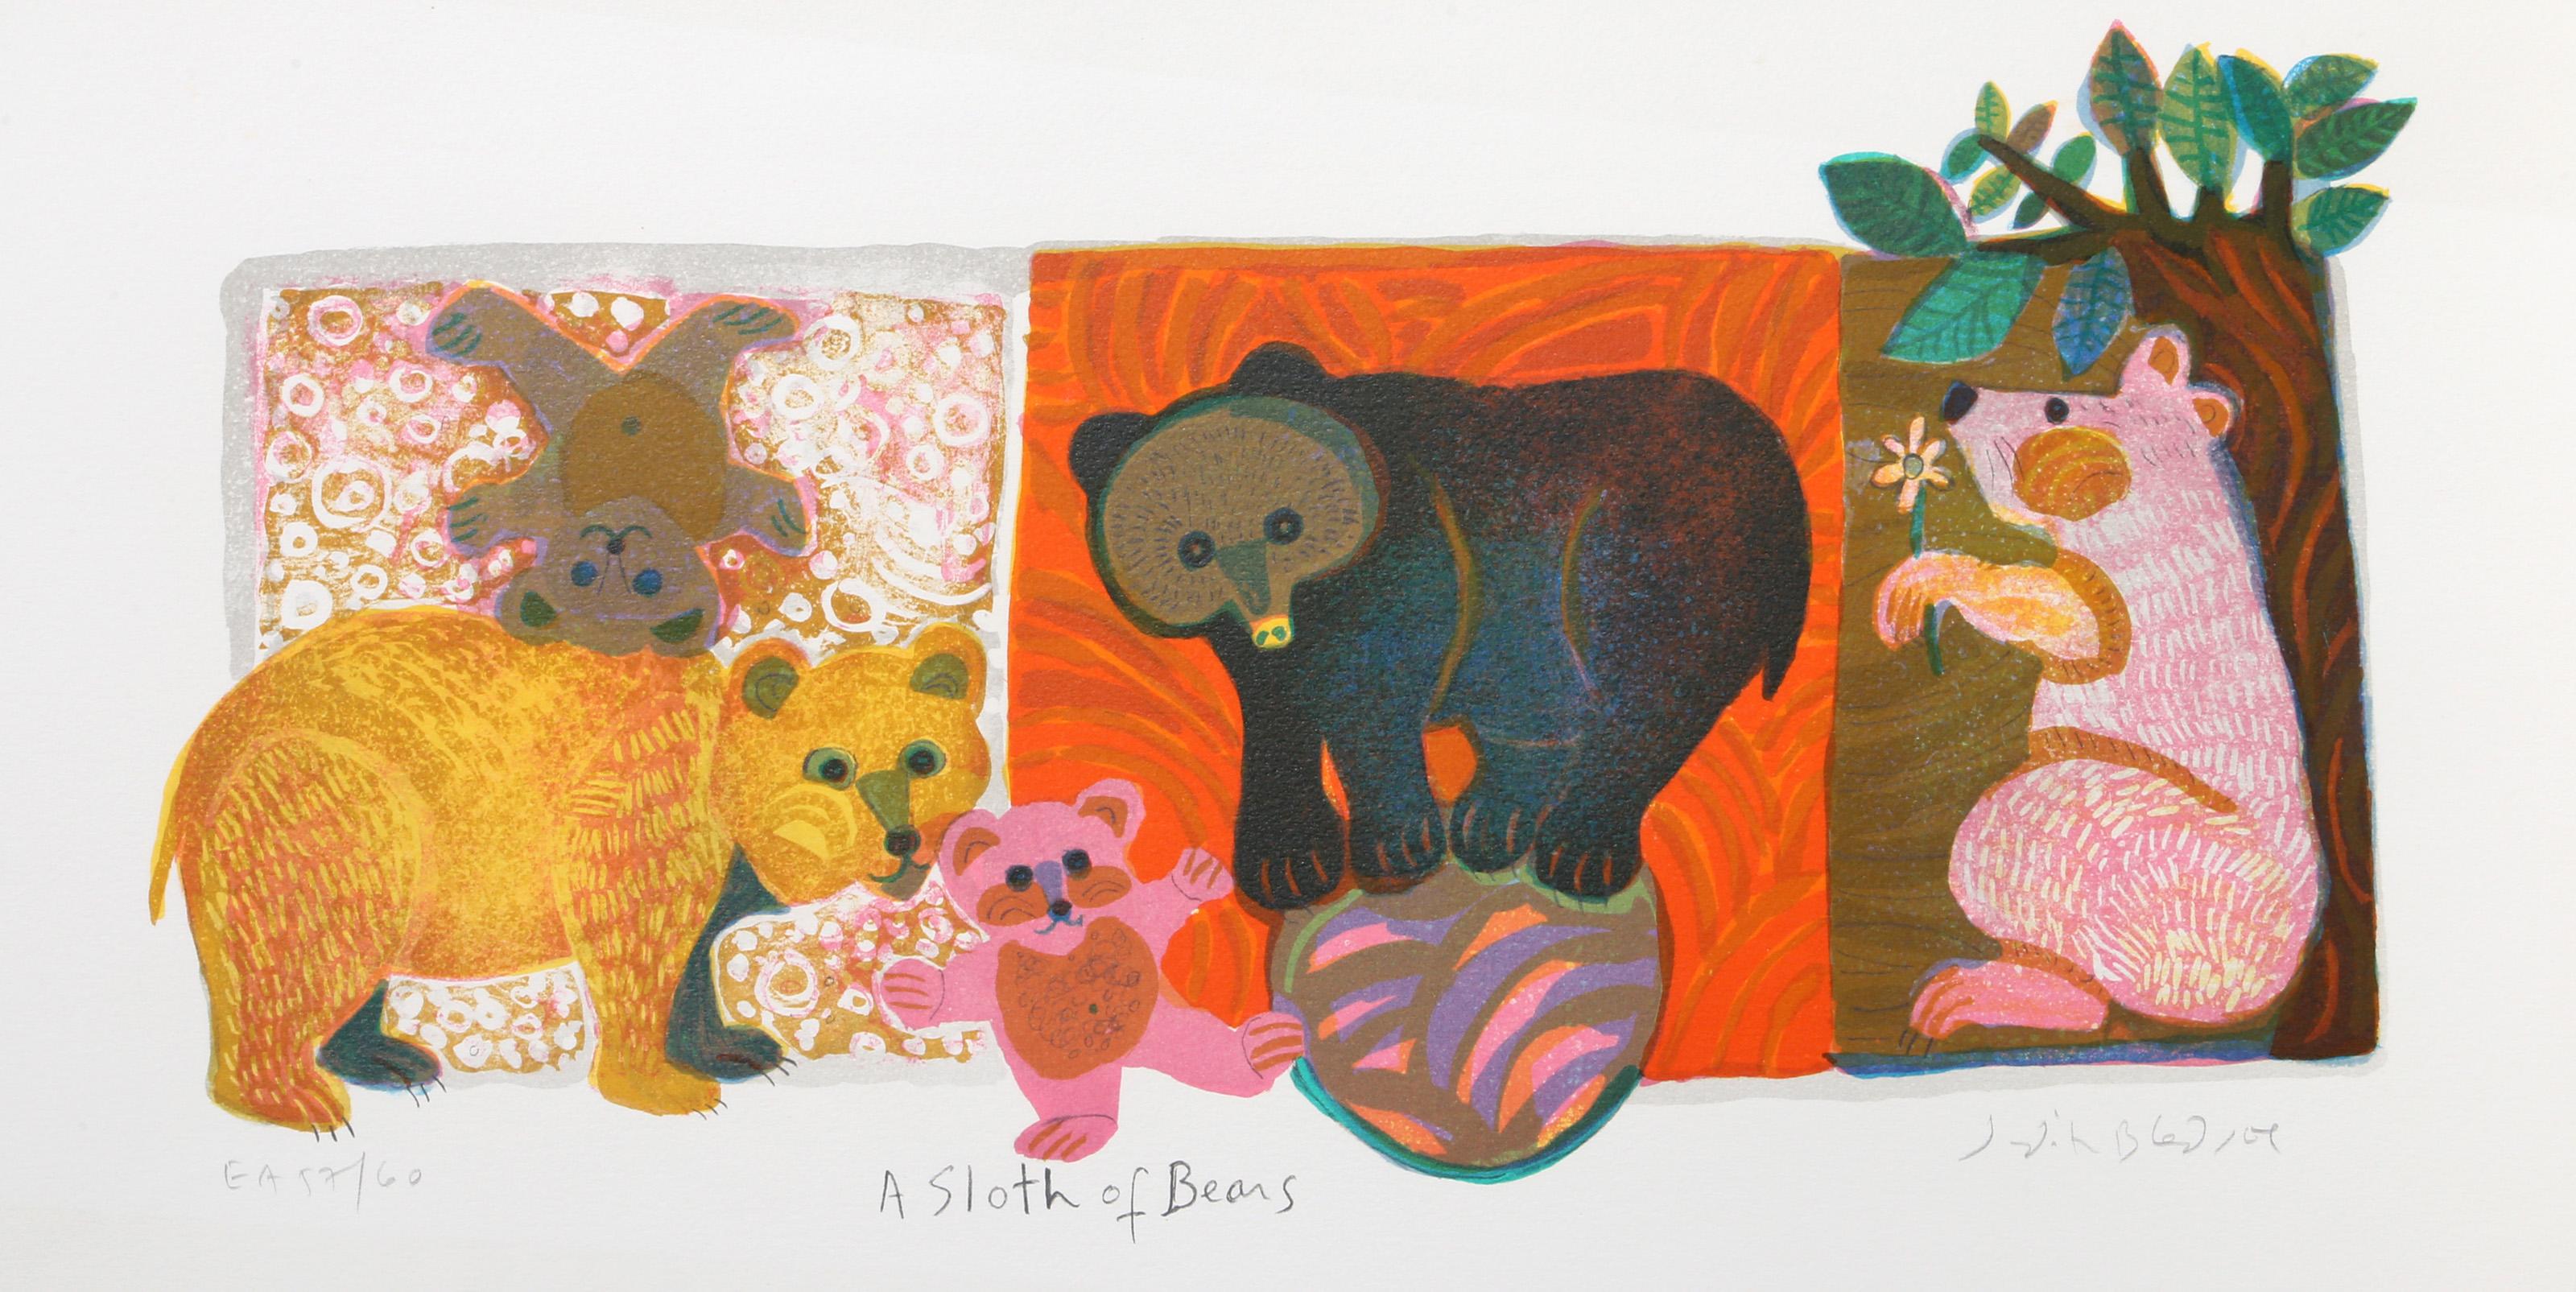 Judith Bledsoe, American (1938 - 2013) -  A Sloth of Bears. Year: circa 1974, Medium: Lithograph, signed in pencil, Edition: EA, Image Size: 8.5 x 13 inches, Size: 11.5  x 23 in. (29.21  x 58.42 cm), Description: Judith Bledsoe's playful depiction